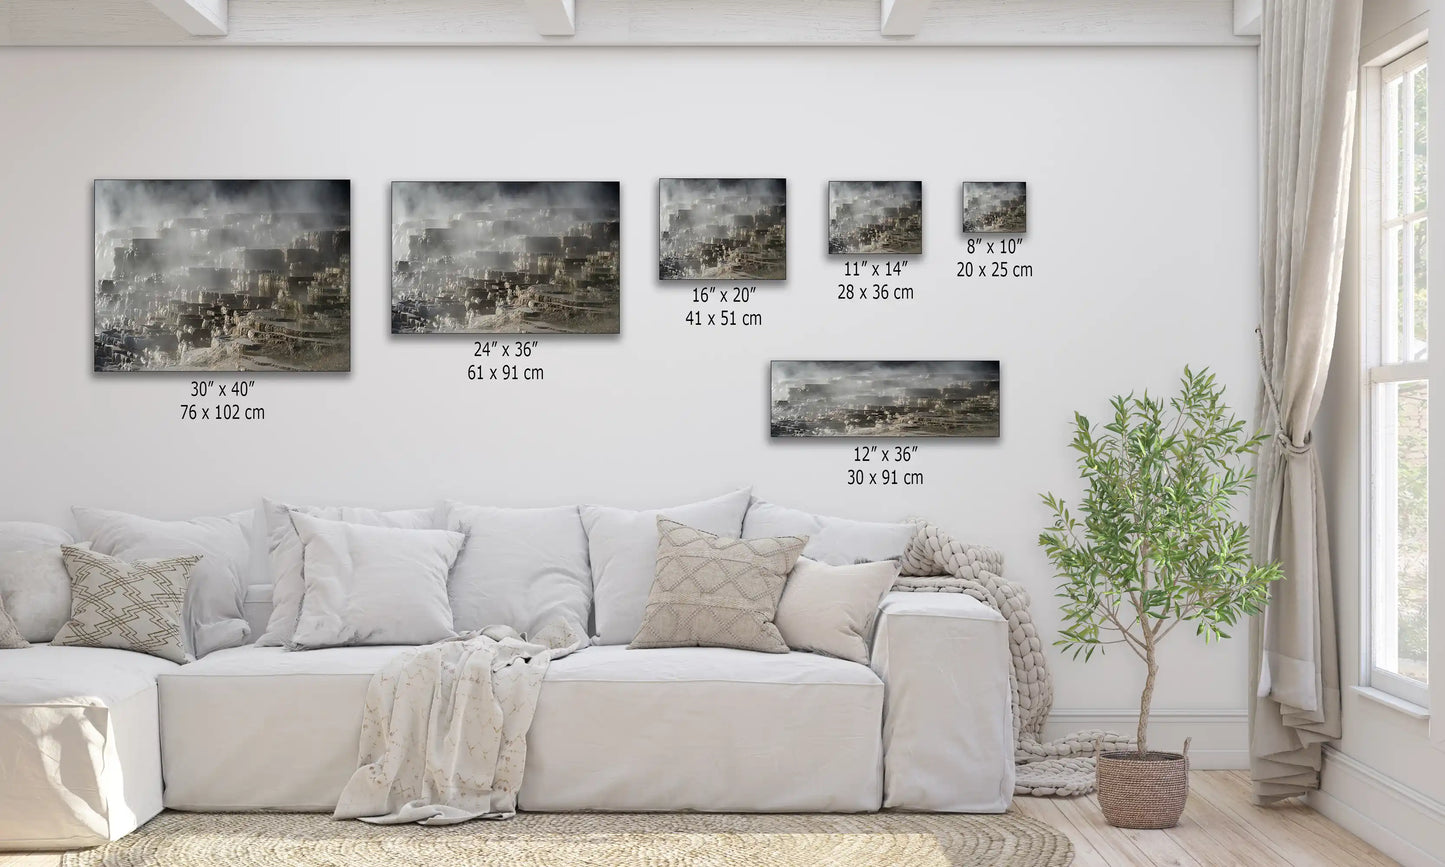 Wall art size comparison chart showing various canvas prints of Mammoth Hot Springs Terraces in a living room setting.